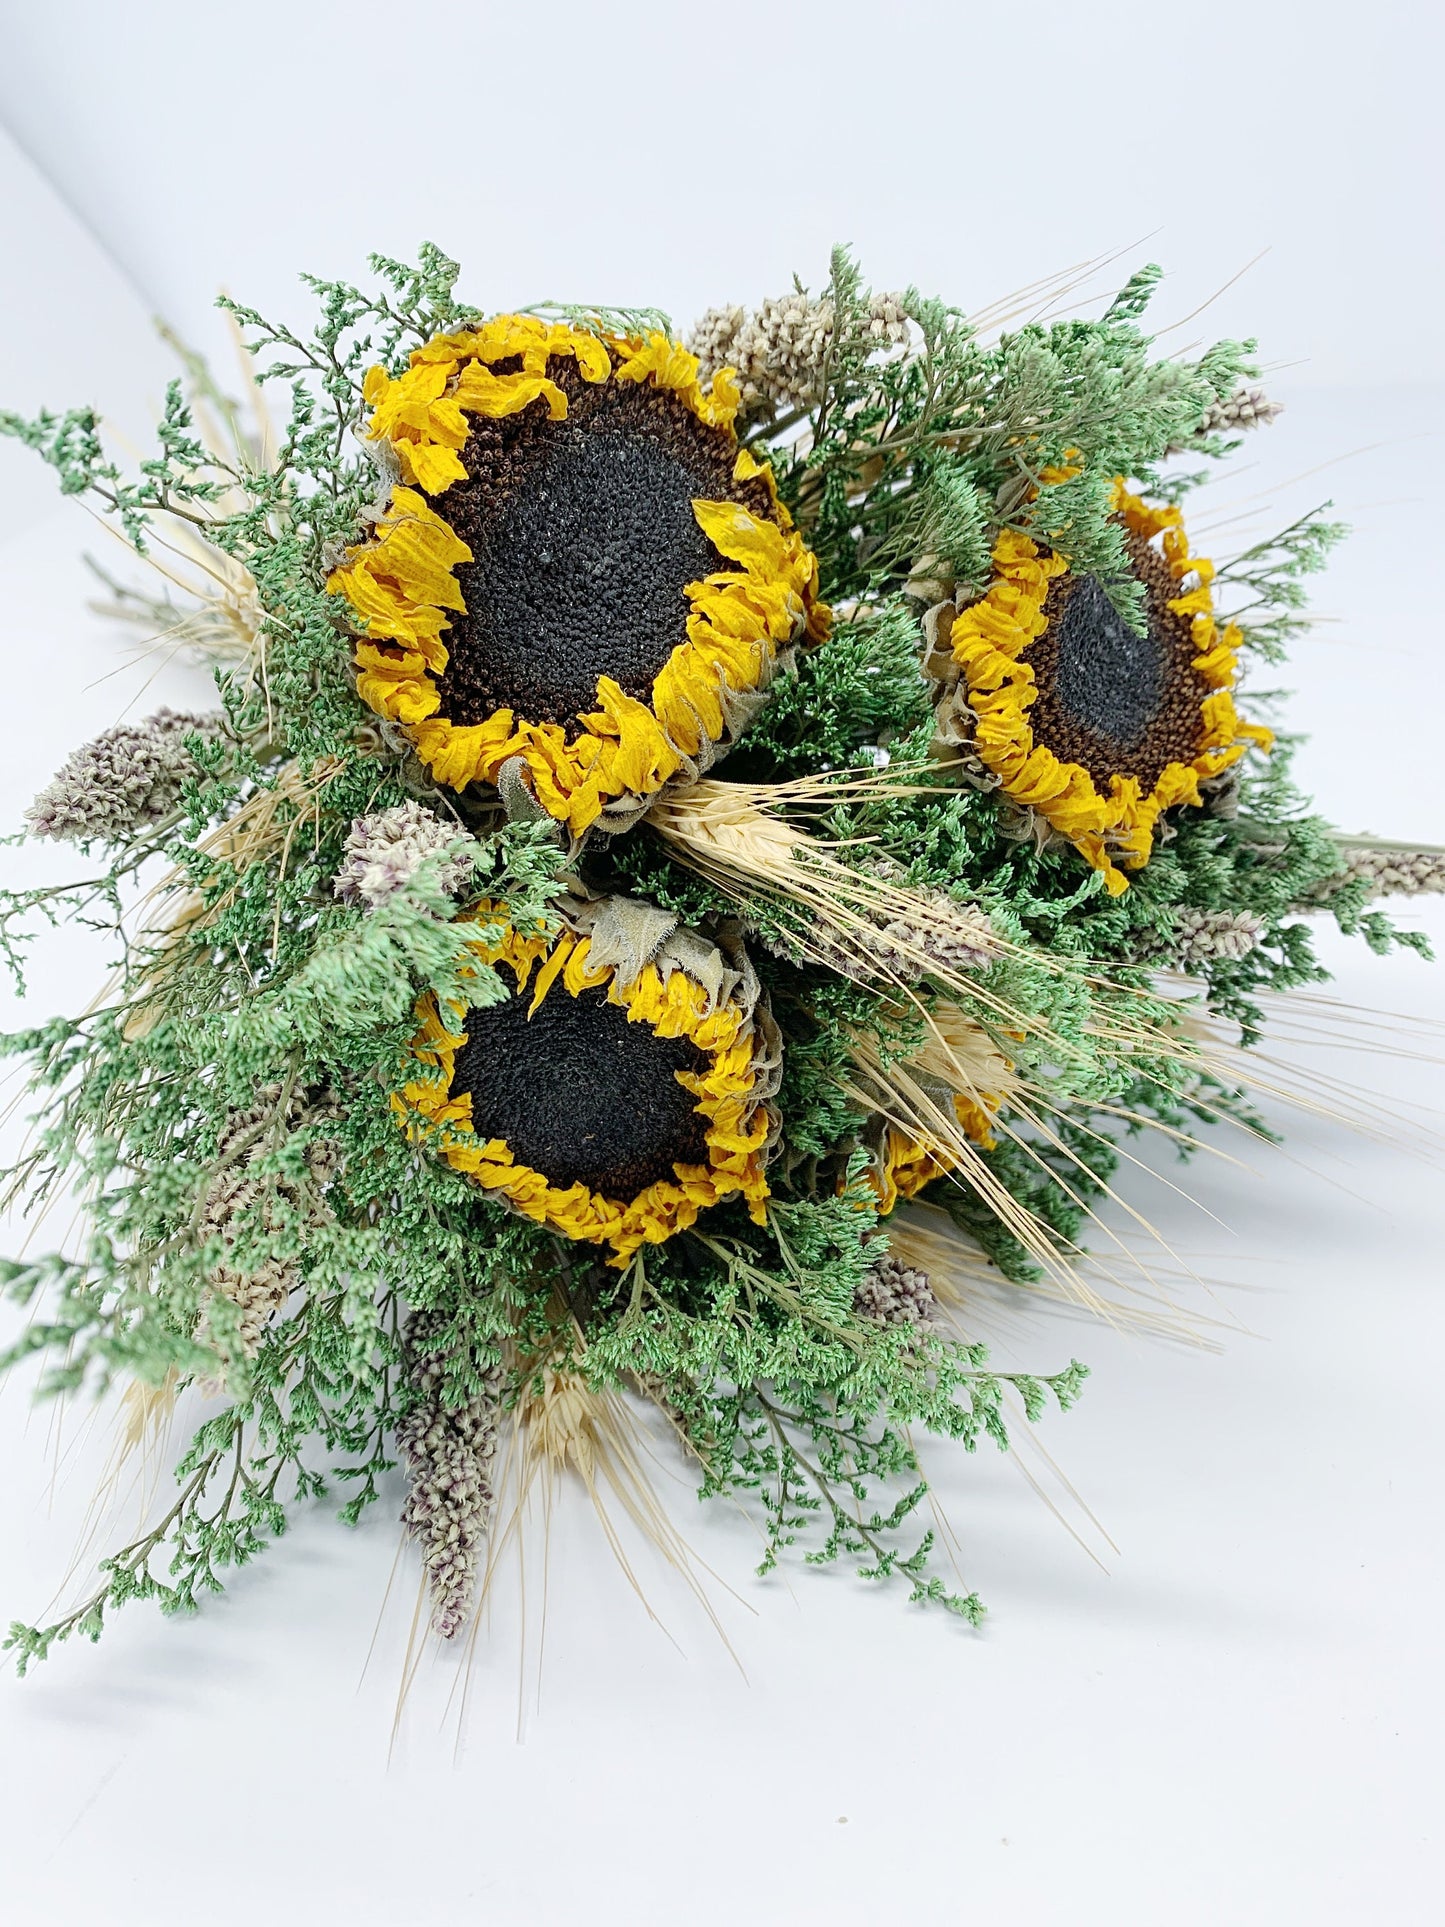 Sunflower Bouquet, Dried Flowers, Preserved, Lace Ribbon, Sunflower, Green Caspia, House Decoration, Wedding, Summer, Rustic